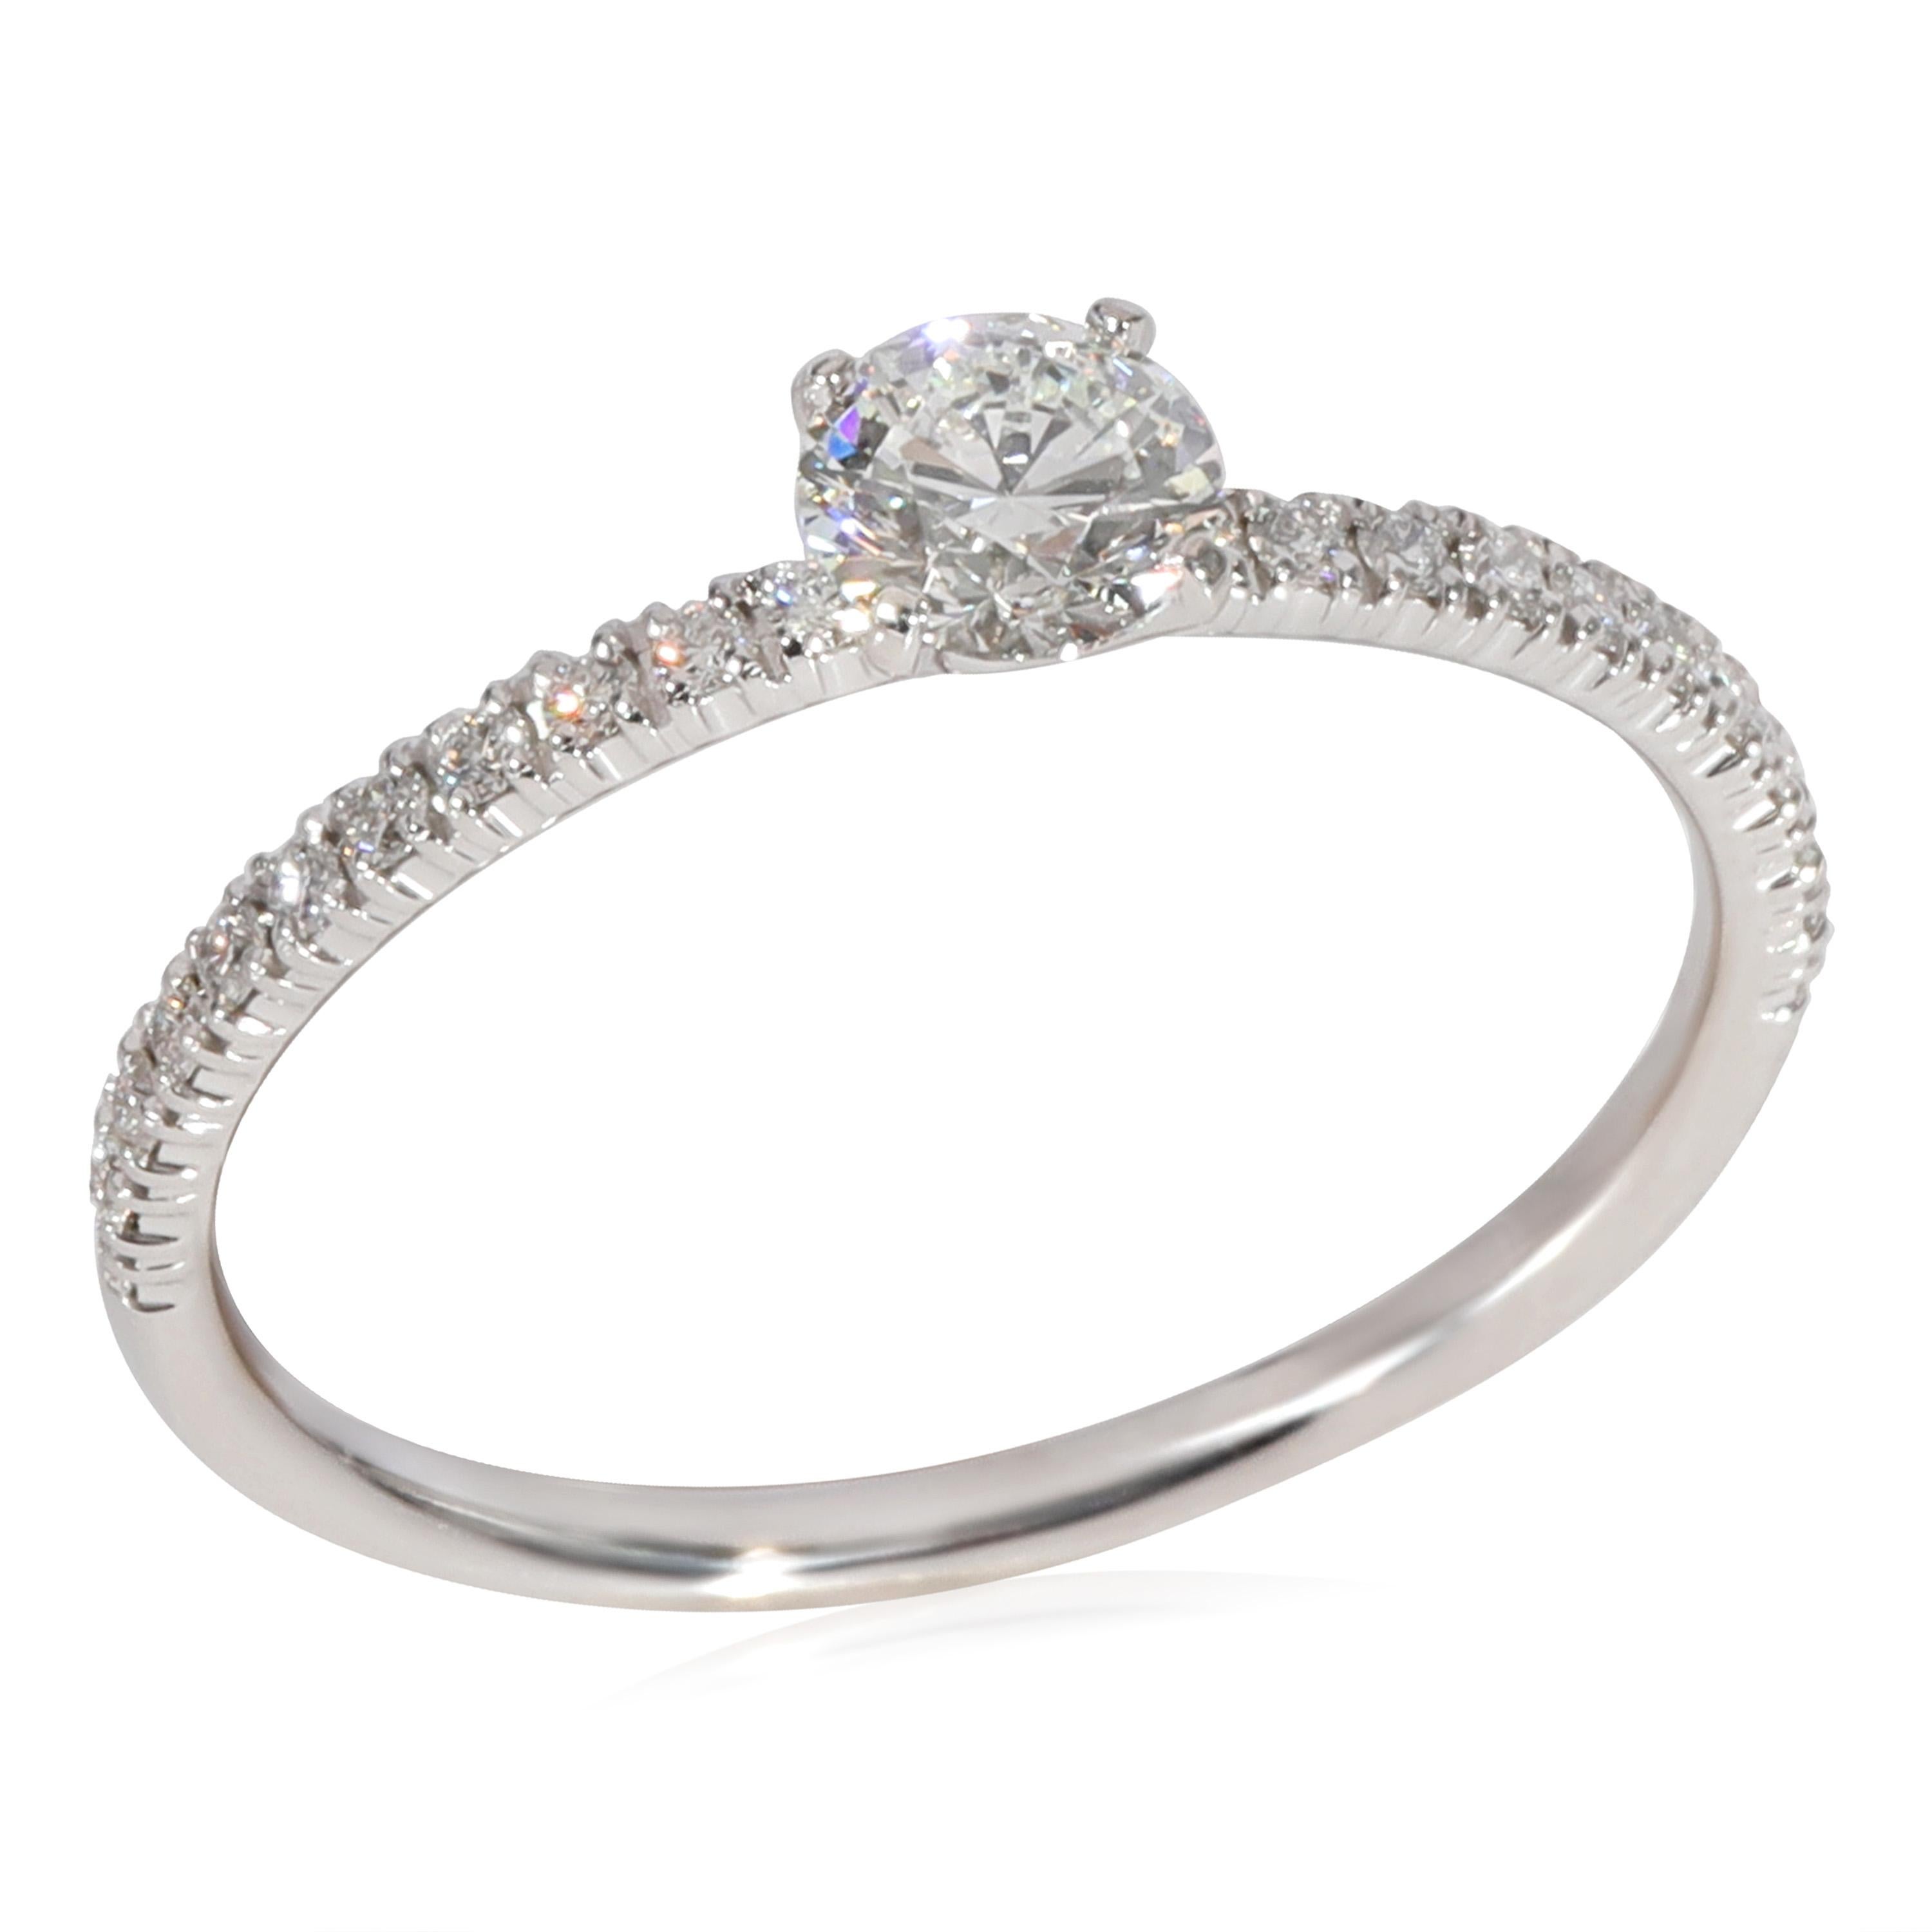 Cartier Etincelle Diamond  Engagement Ring in 950 Platinum G VVS2 0.5 CTW

PRIMARY DETAILS
SKU: 125945
Listing Title: Cartier Etincelle Diamond  Engagement Ring in 950 Platinum G VVS2 0.5 CTW
Condition Description: Retails for 5800 USD. In excellent